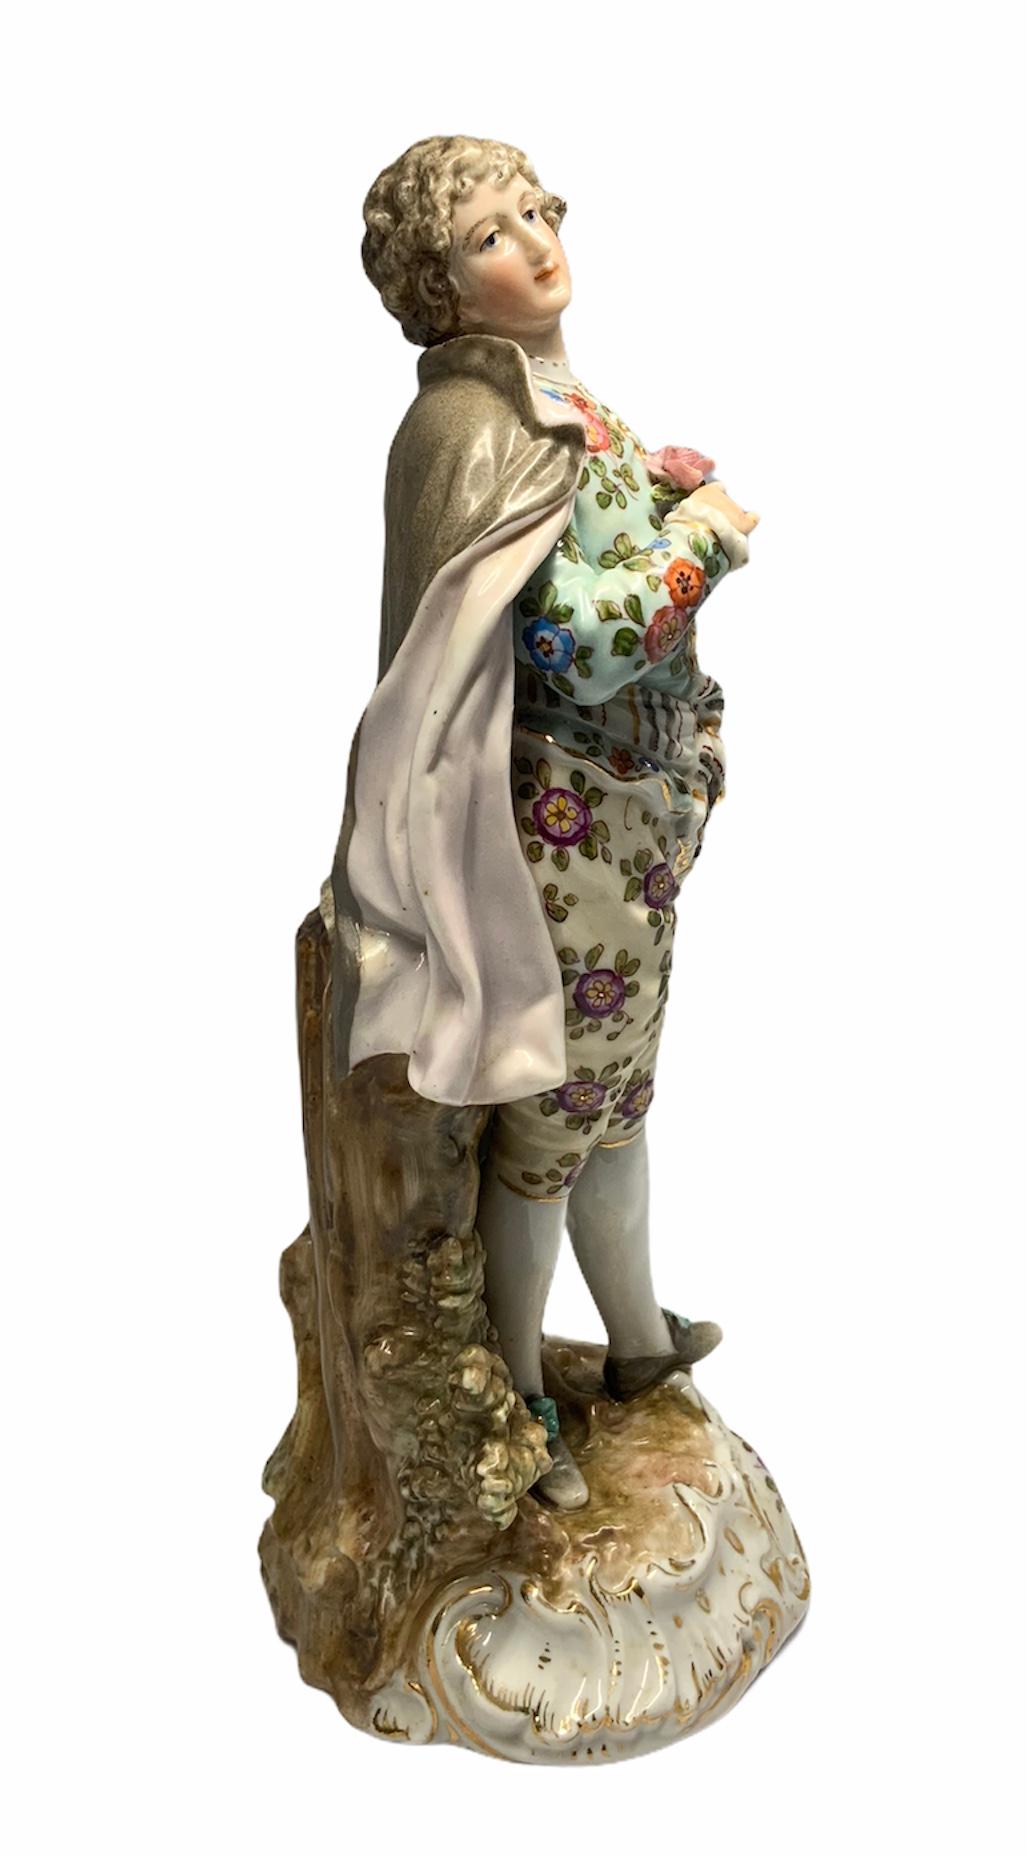 This is a Volksted Porcelain depicting a gentleman dressed with two different colorful flower fabrics in his blouse & pants. His shoes are adorned with flowers. He is holding a rose in his right hand & a gentleman cane in his left hand. A grey cape